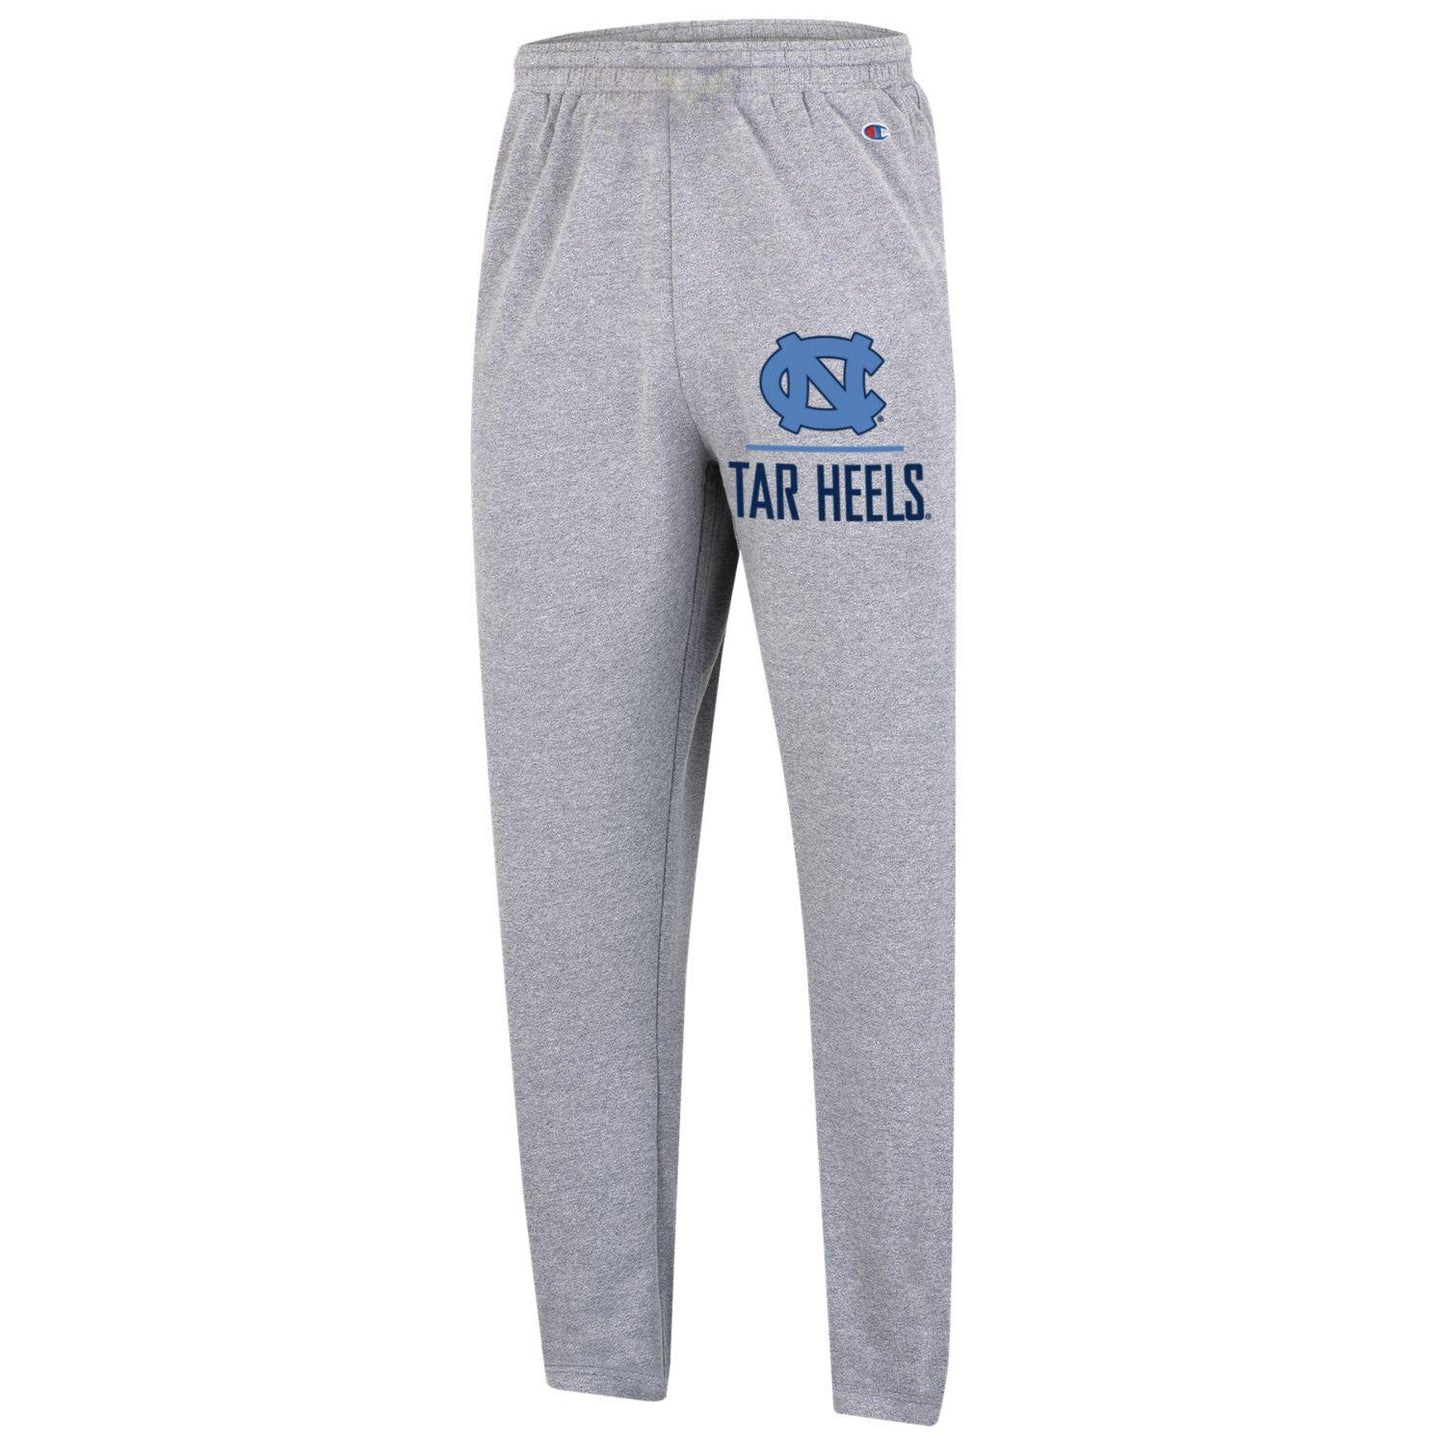 UNC Tar Heels Grey French Terry Banded Bottom Pants by Champion